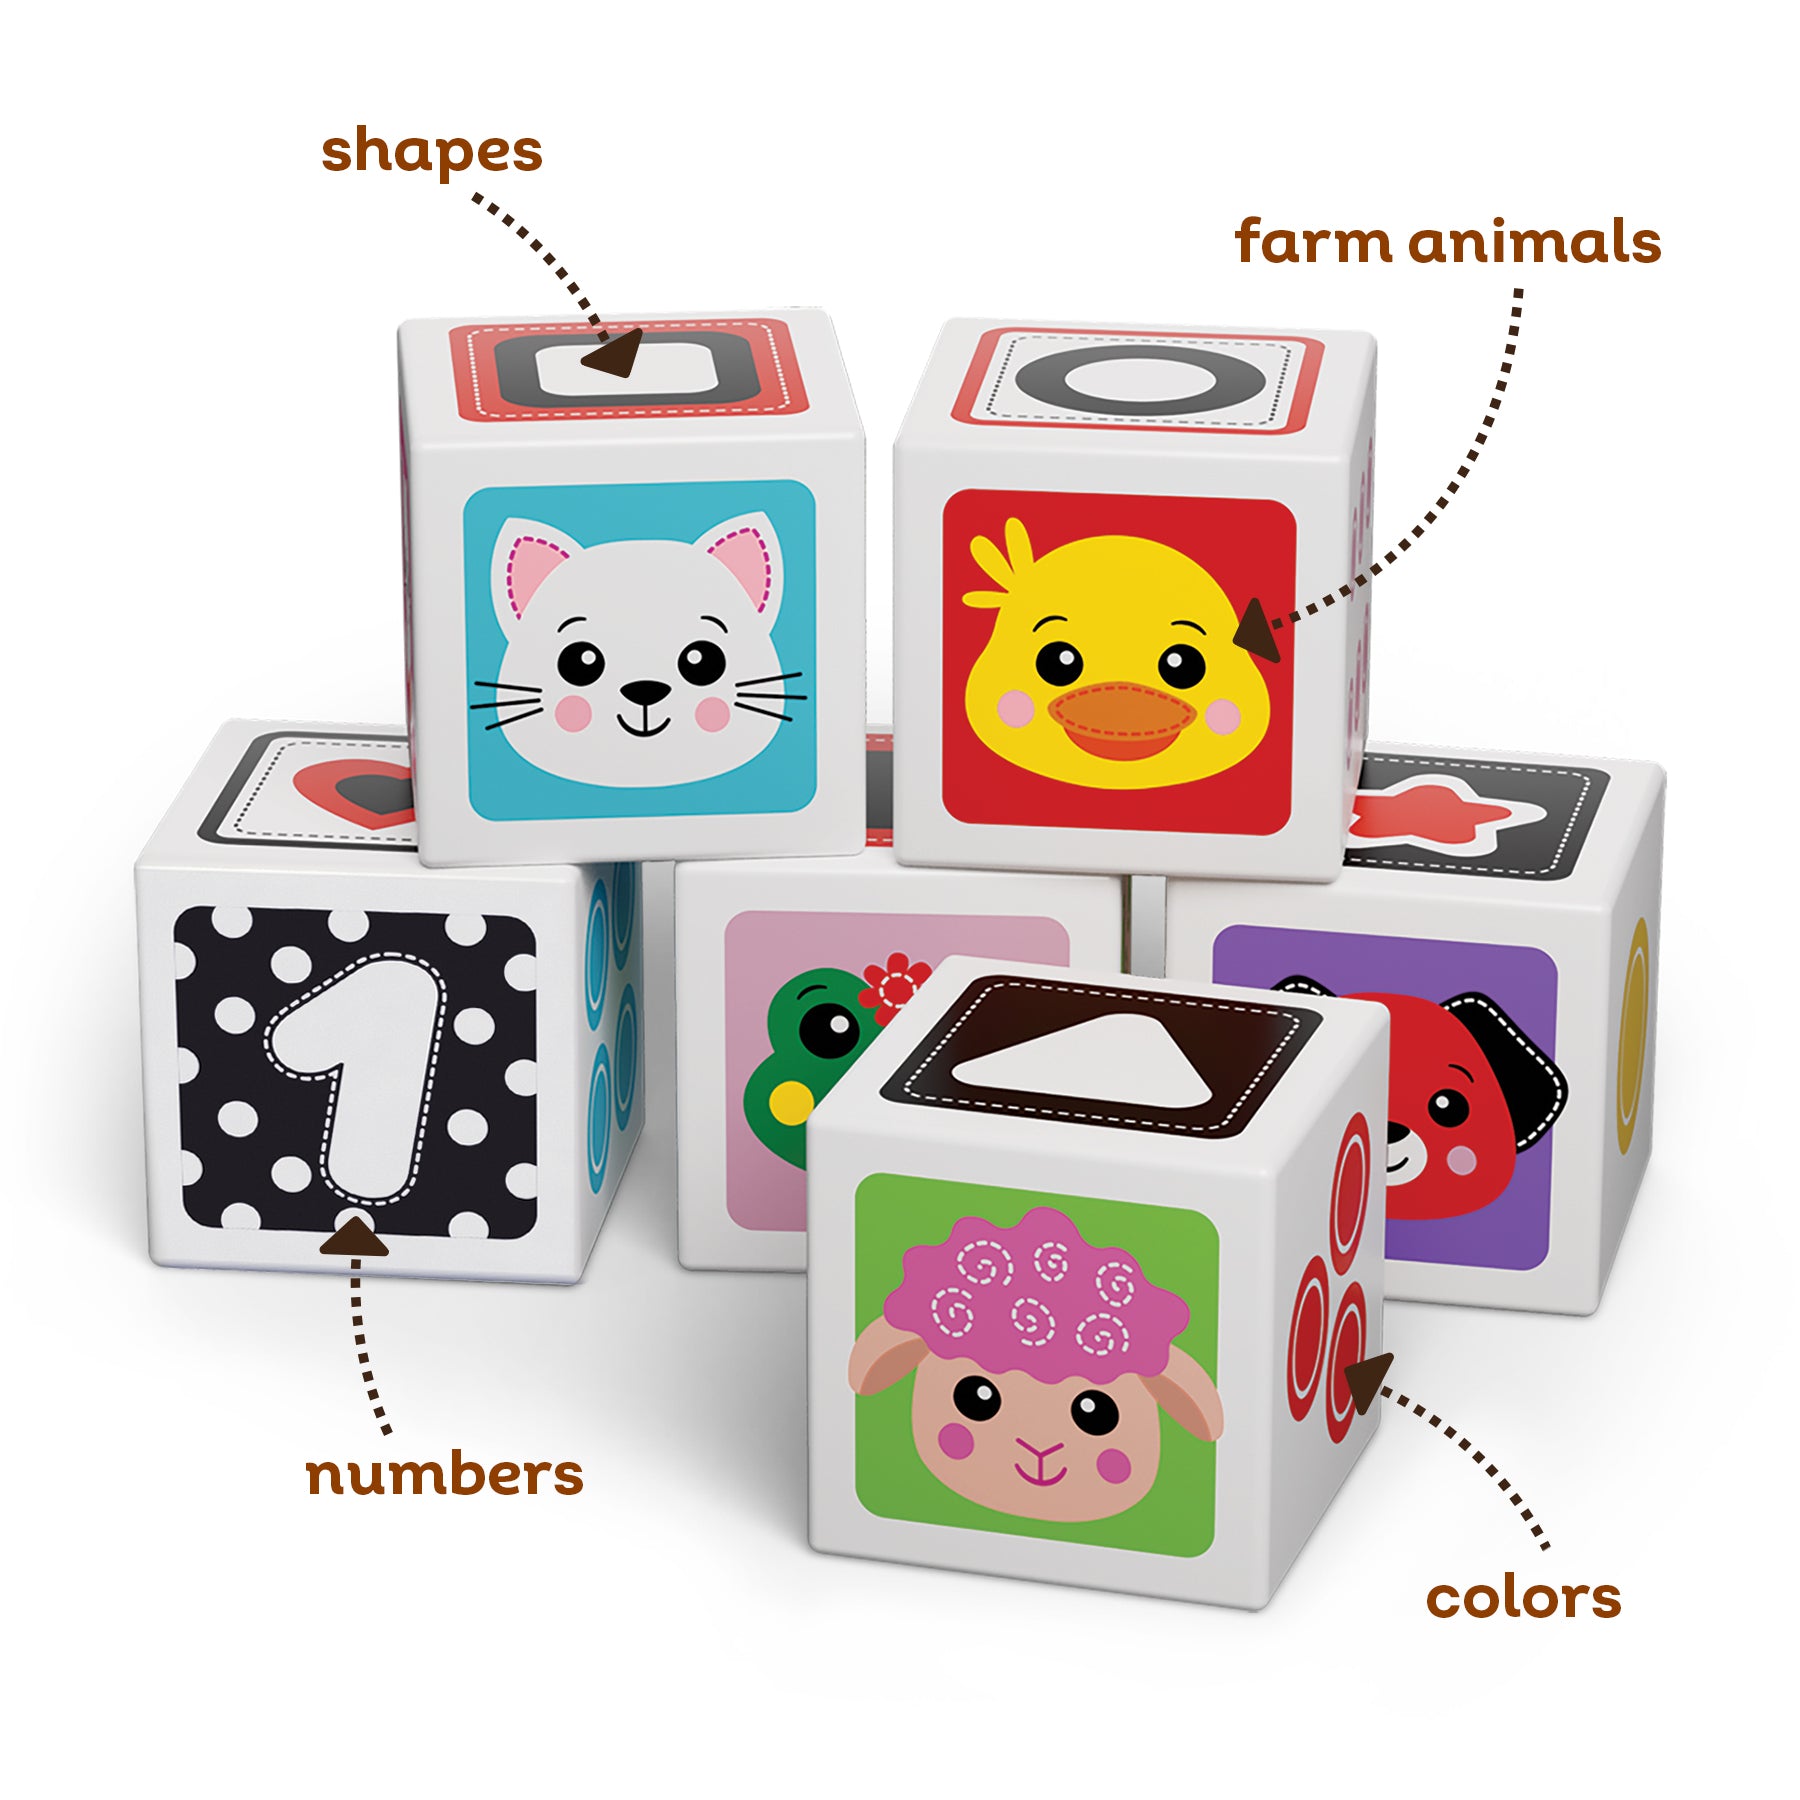 Kids Hits: My First Wooden Cubes - Stack, Match, and Explore with Six Cute Animals, Numbers, and Shapes – 100% Eco-Friendly Fun